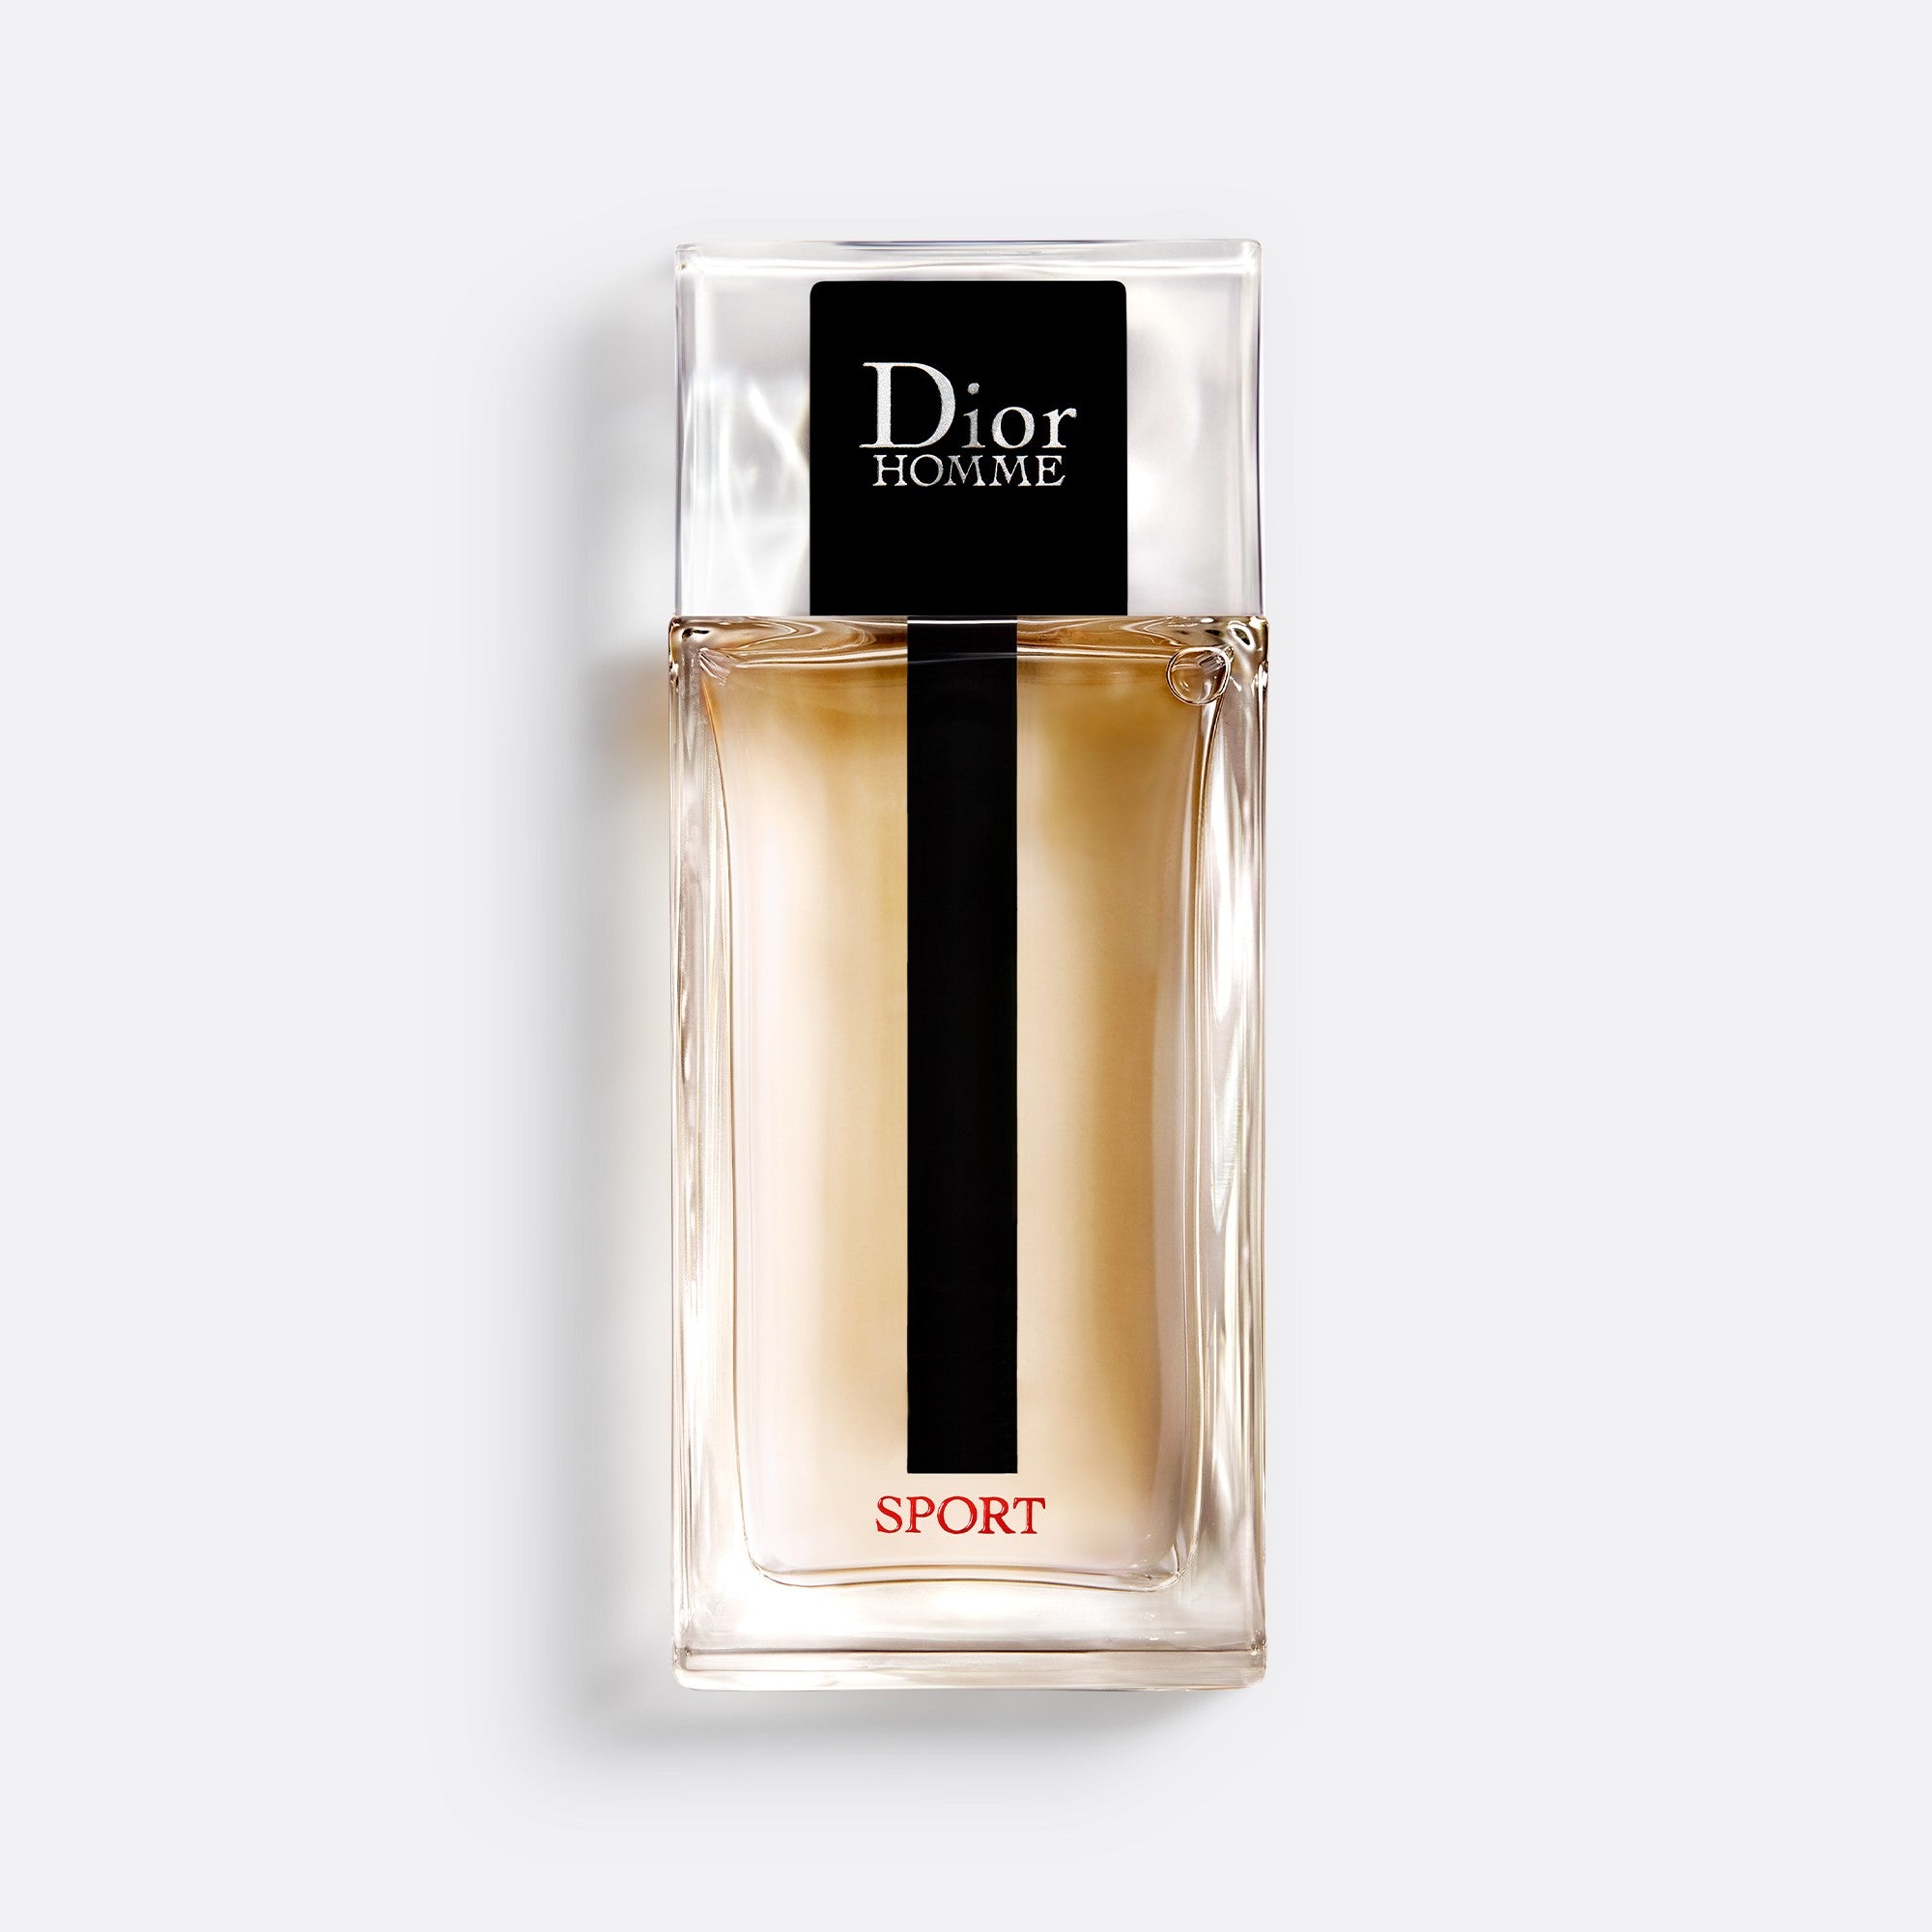 DIOR HOMME SPORT | Eau de Toilette - fresh, woody and spicy notes